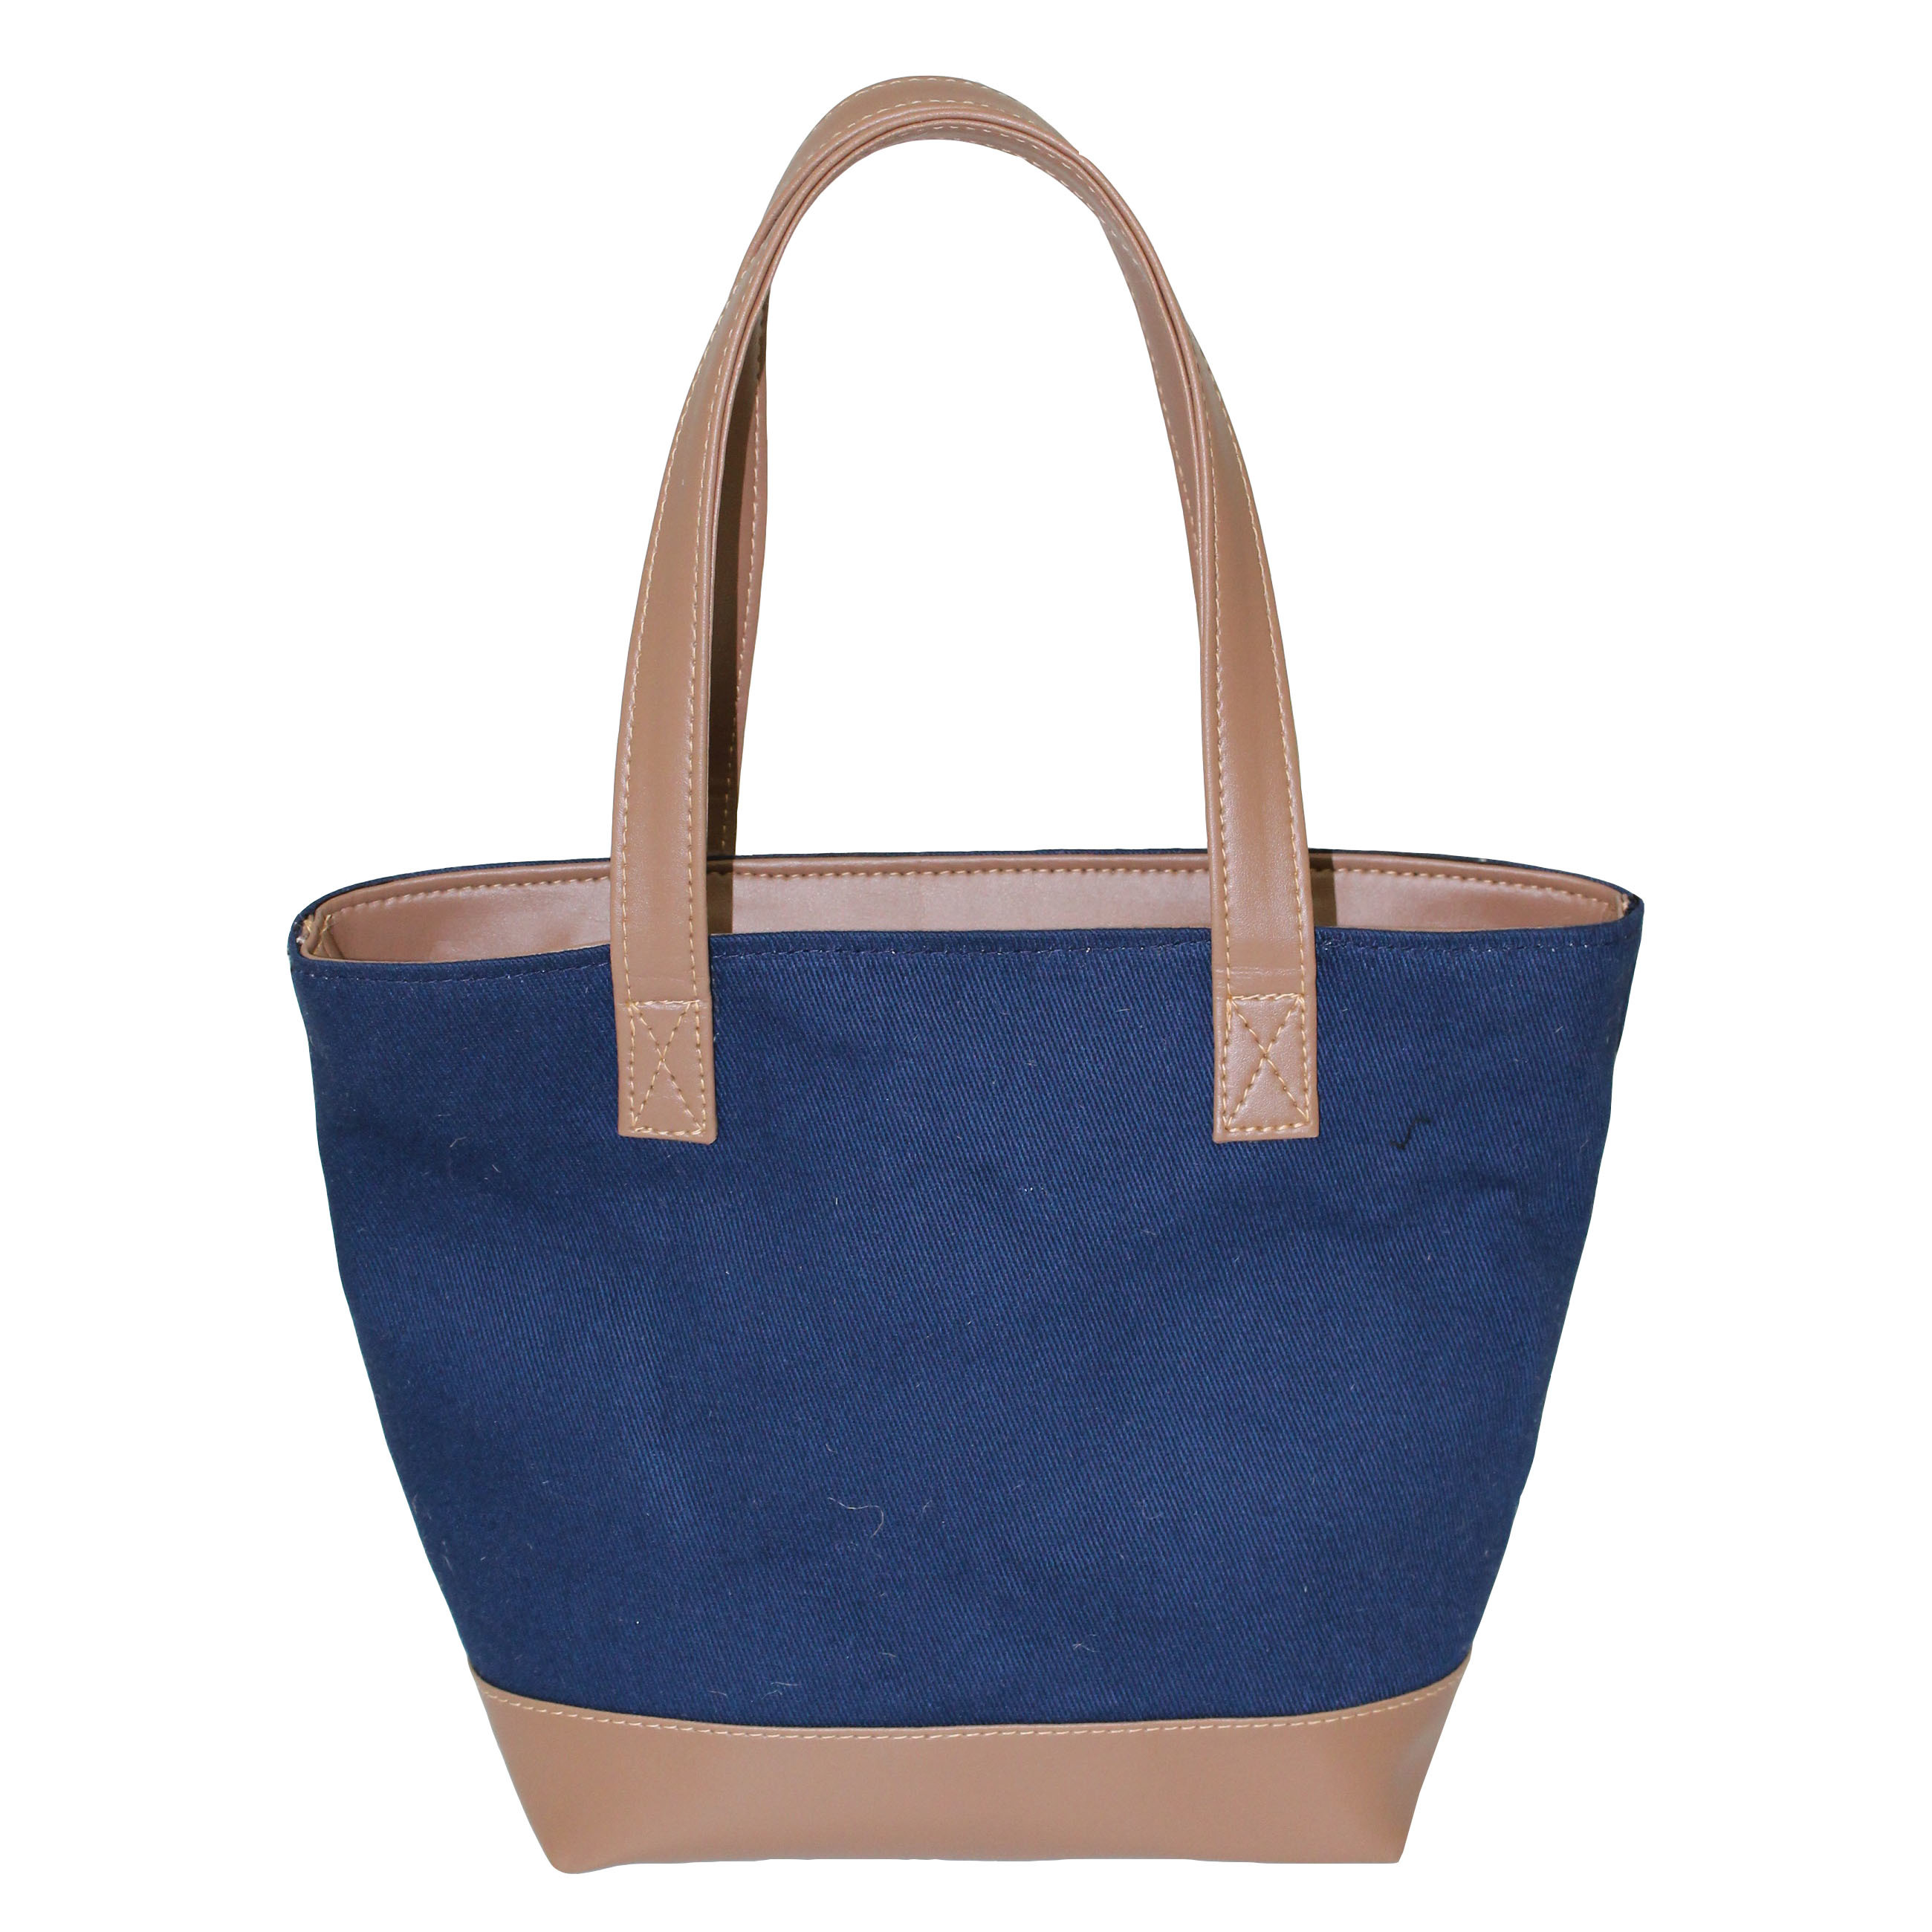 Inside Polyester Lining With Pu Handle 12 Oz Dyed Canvas Tote Bag